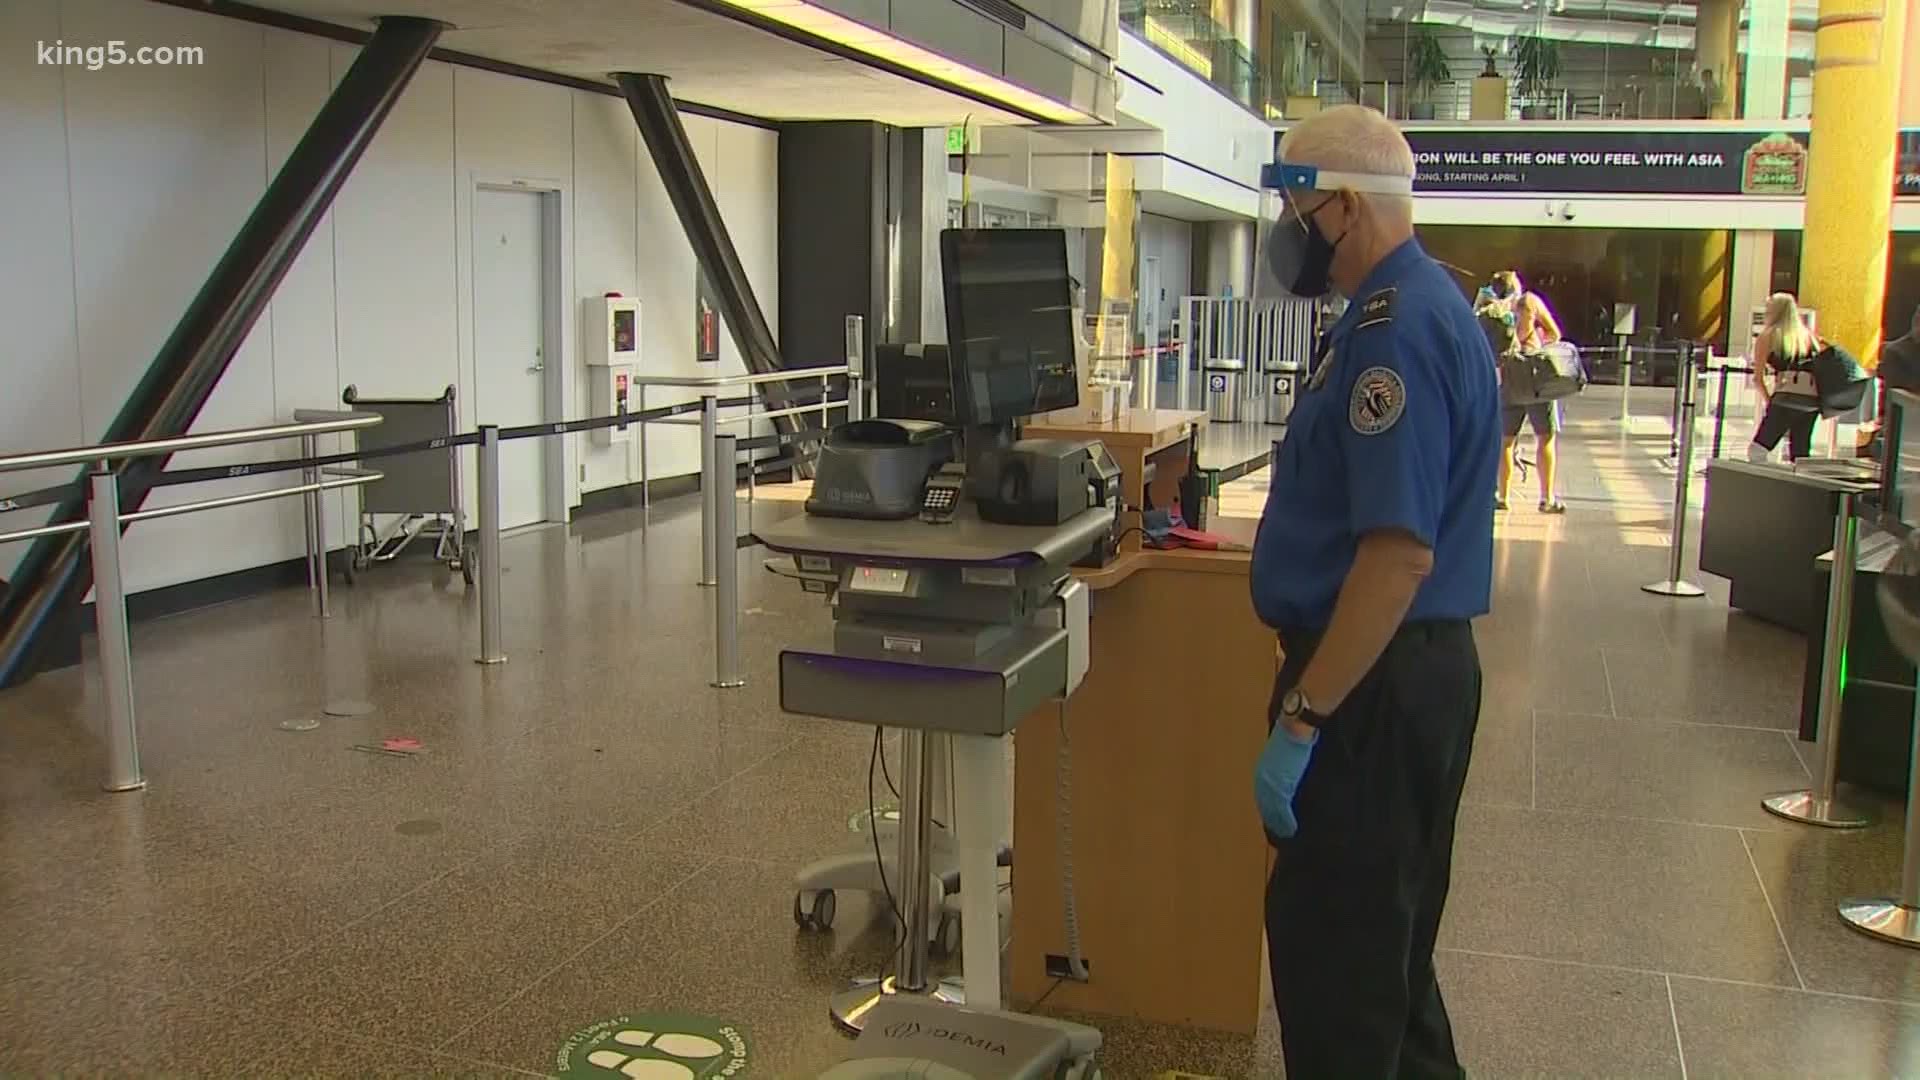 Sea-Tac Airport’s new COVID-19 safety protocols include signs encouraging social distancing, ID scanners at TSA checkpoints and no scanning bins for empty items.